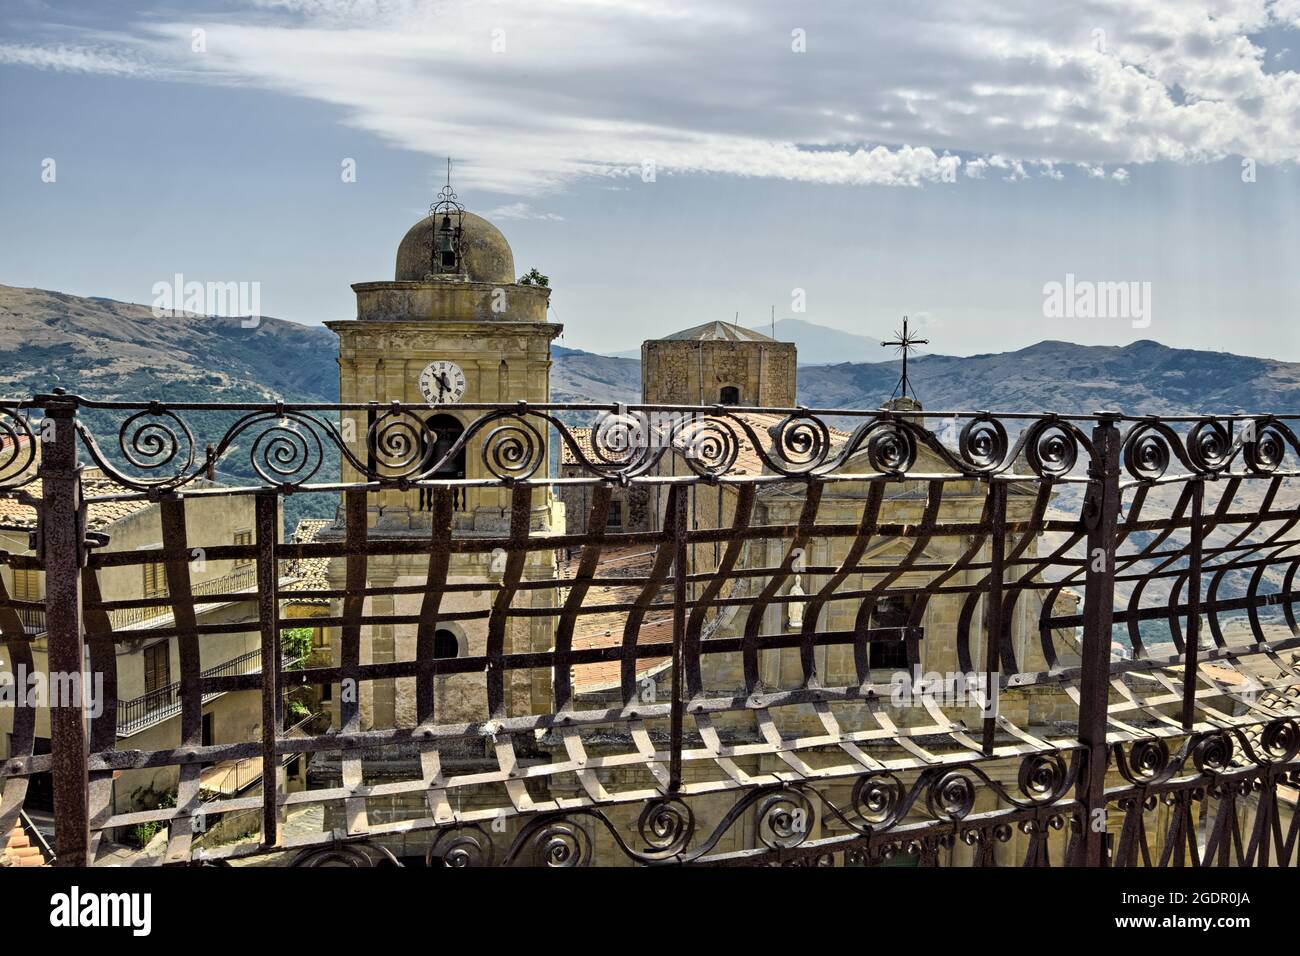 art and architecture of Sicily beyond a wrought iron railing view of Mother Church in town of Capizzi, Messina Stock Photo